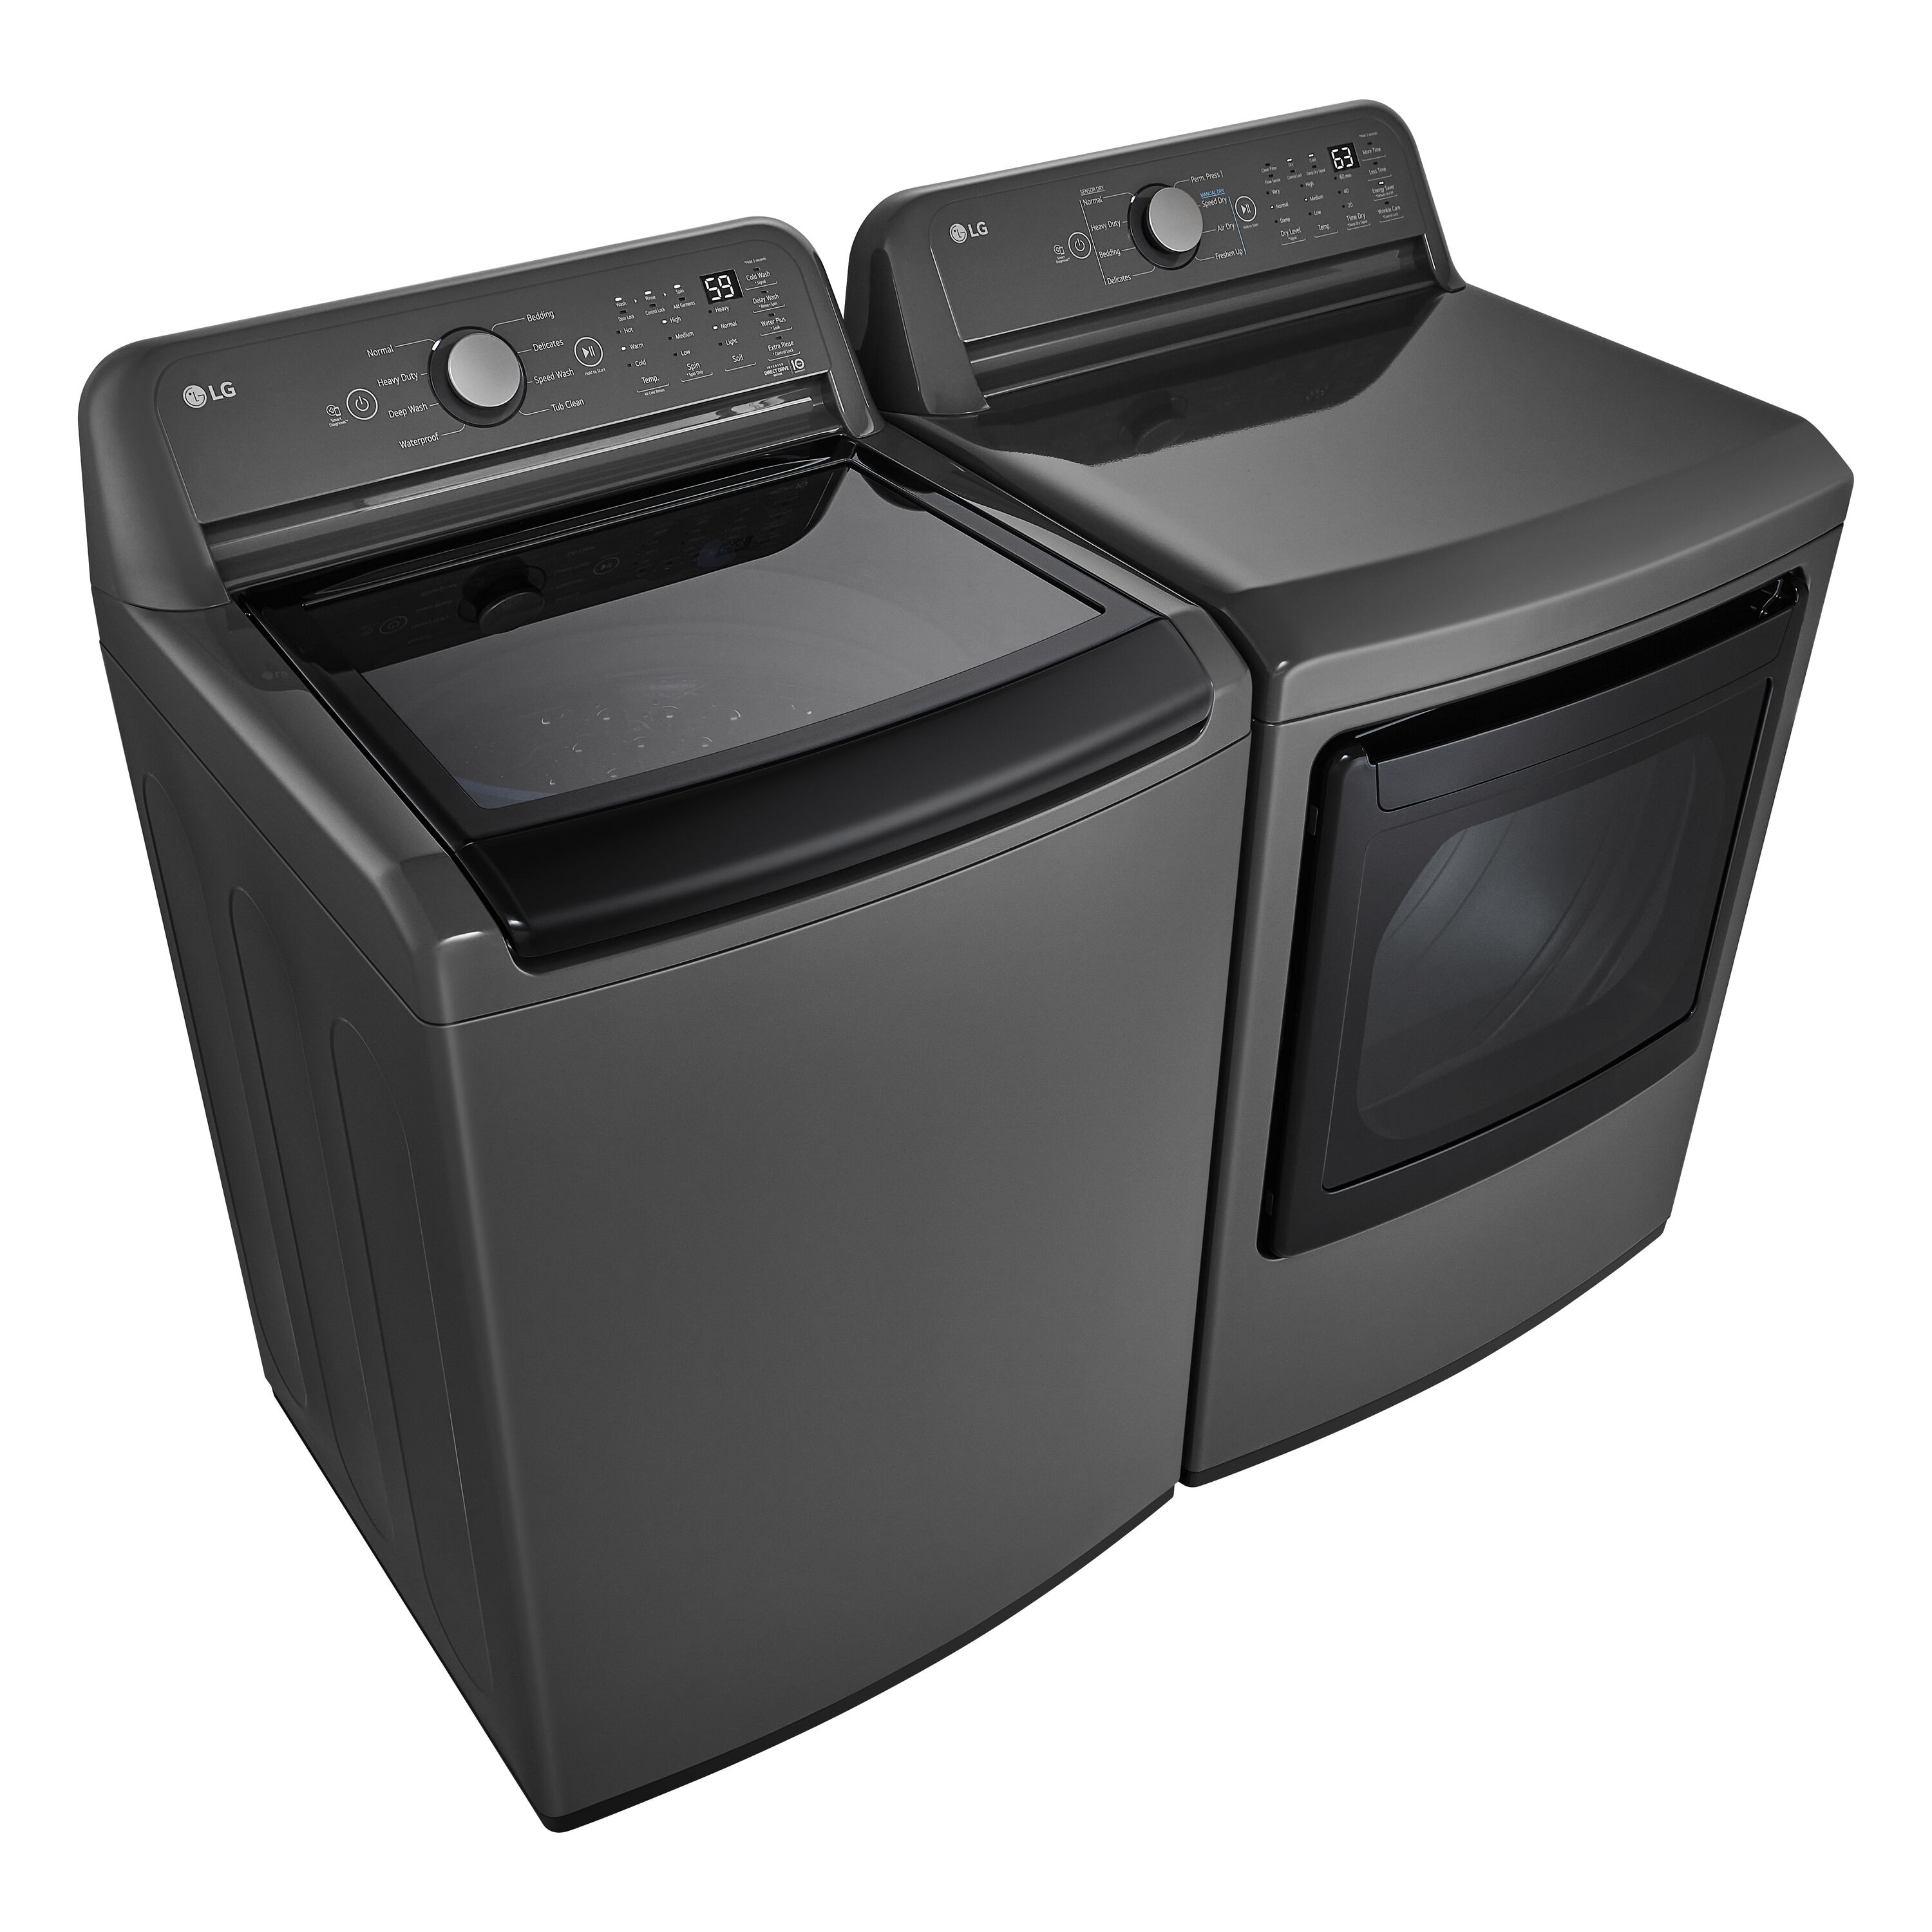 LG DLG7151M: 7.3 Cu. ft. Ultra Large Capacity Rear Control GAS Energy Star Dryer with Sensor Dry